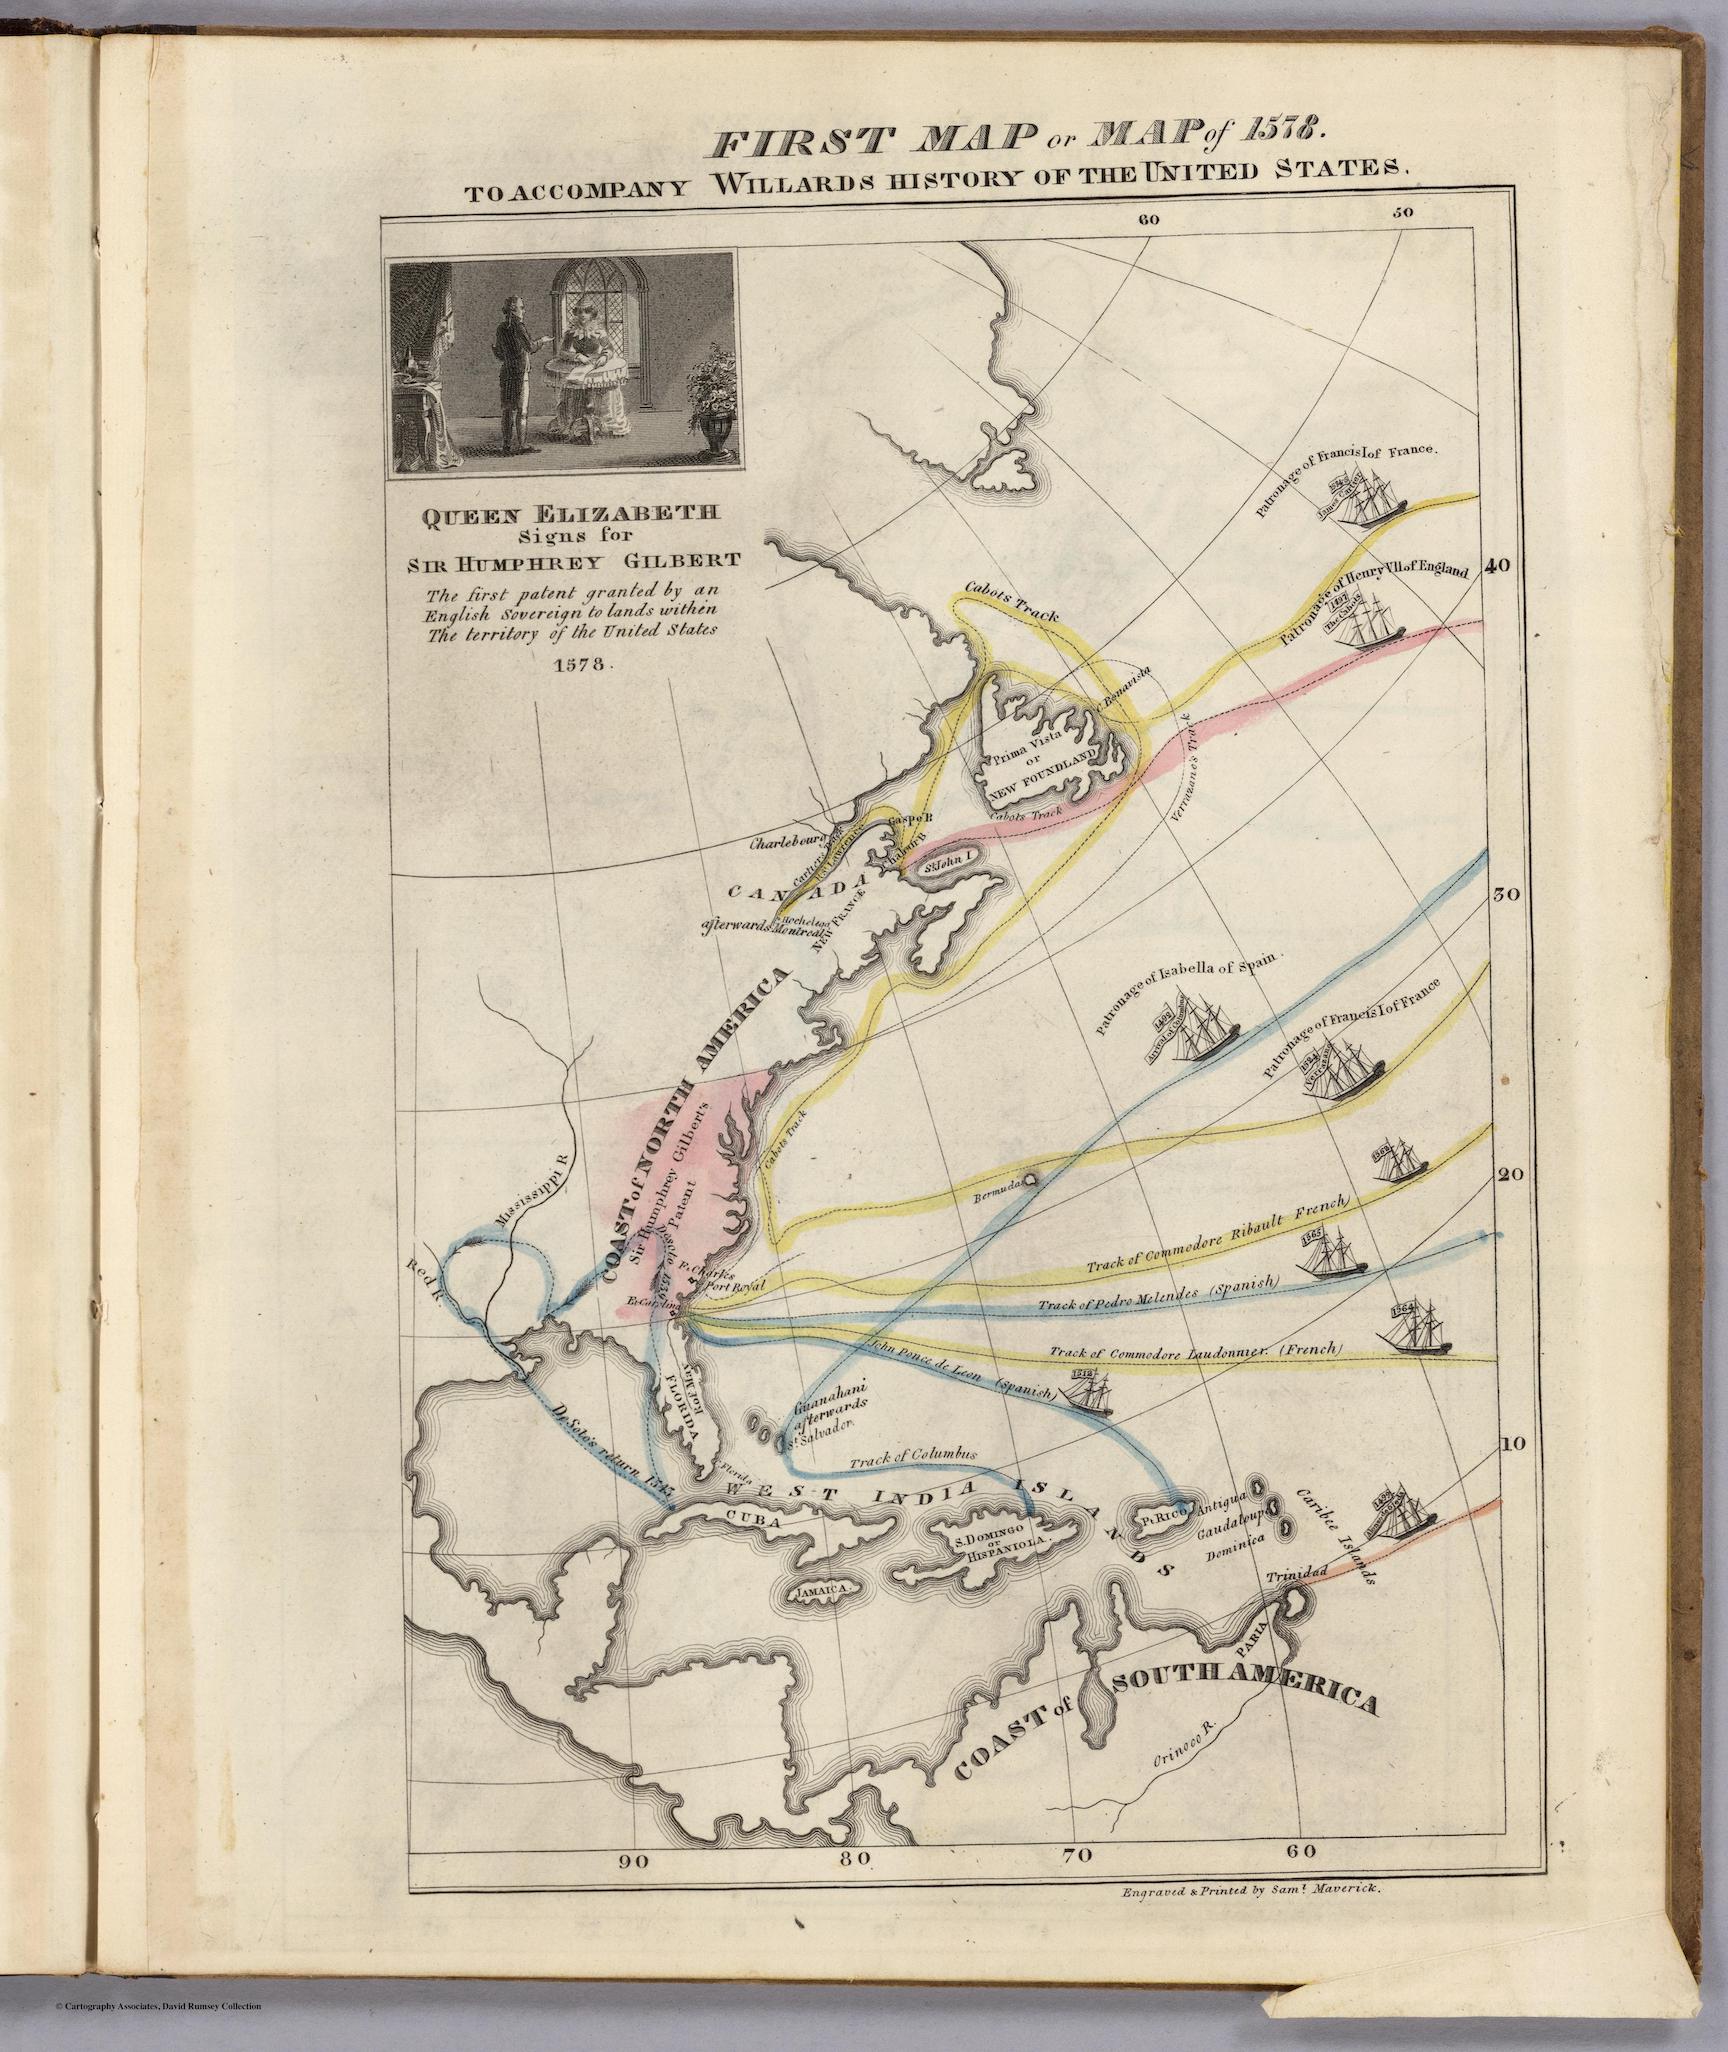 A map of the east coast of North America from Canada all the way down to the north coast of South America. A few Caribbean islands are depicted as well as several icons of ships traveling across the Atlantic ocean. Dotted lines highlighted in yellow, blue, and pink show routes taken and settlements made by the French, the Spanish, and the English, respectively. The year of the journey and the name of the ship are both written in each ship’s flags, and the names of particular travelers, or whom they travel in service of, are written above the ships. In the top left-hand corner, a small, detailed illustration of Queen Elizabeth is printed with a caption reading: “The first patent granted by an English Sovereign to lands within the territory of the United States.”